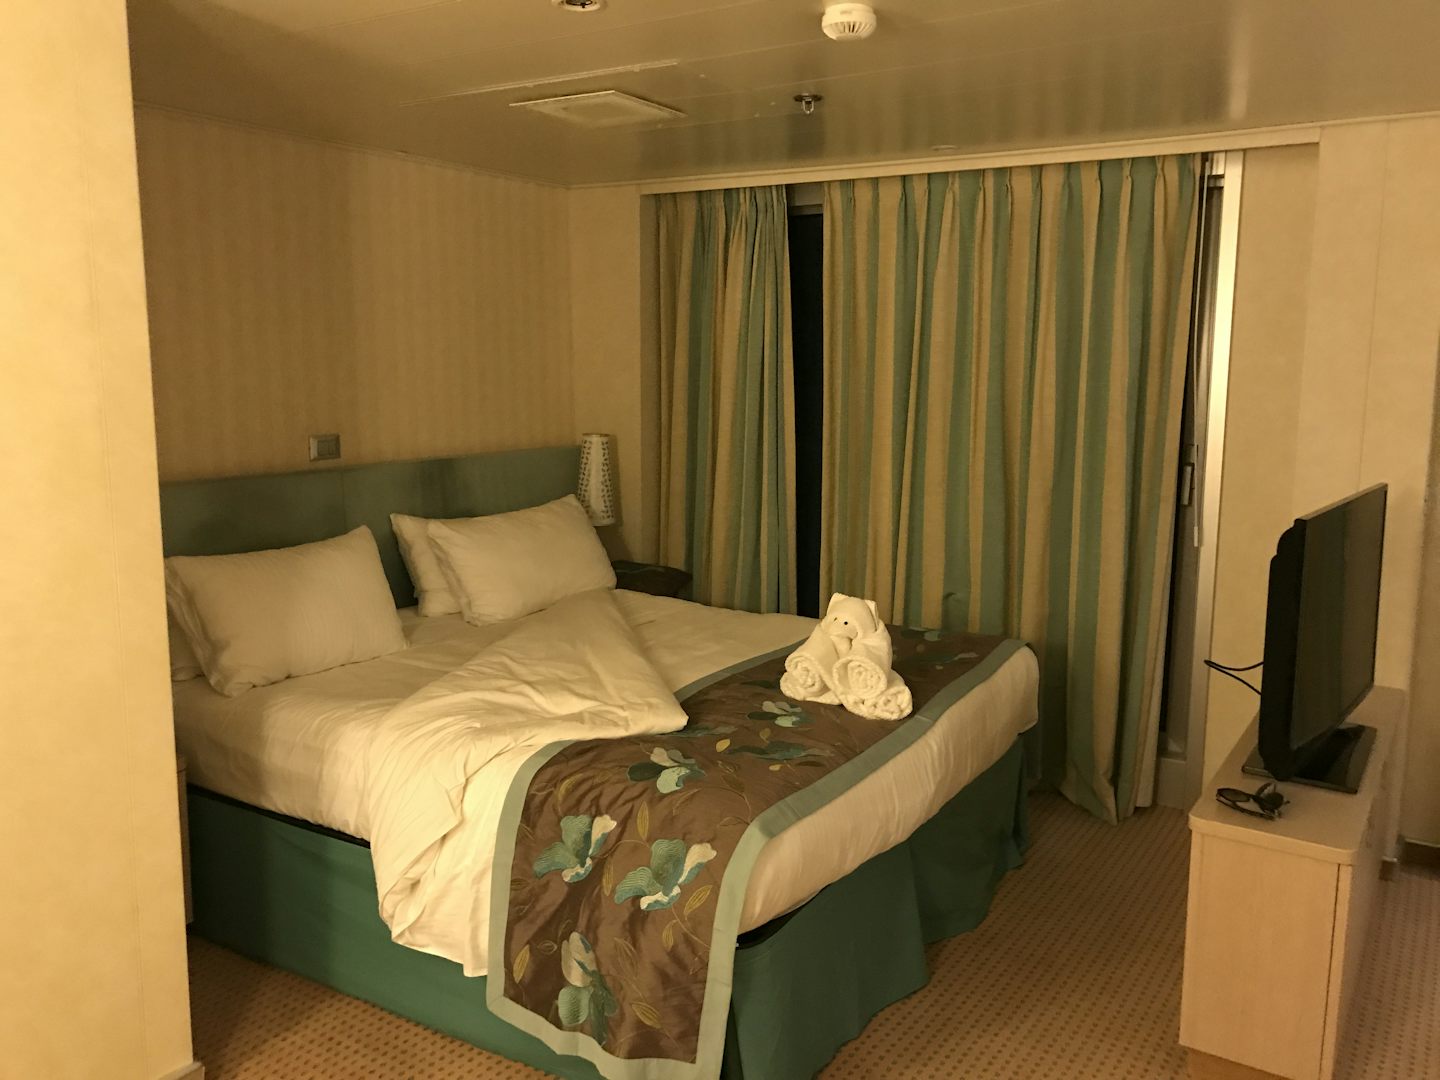 Bed area, which has sliding door to the long balcony area.  Photo taken fro